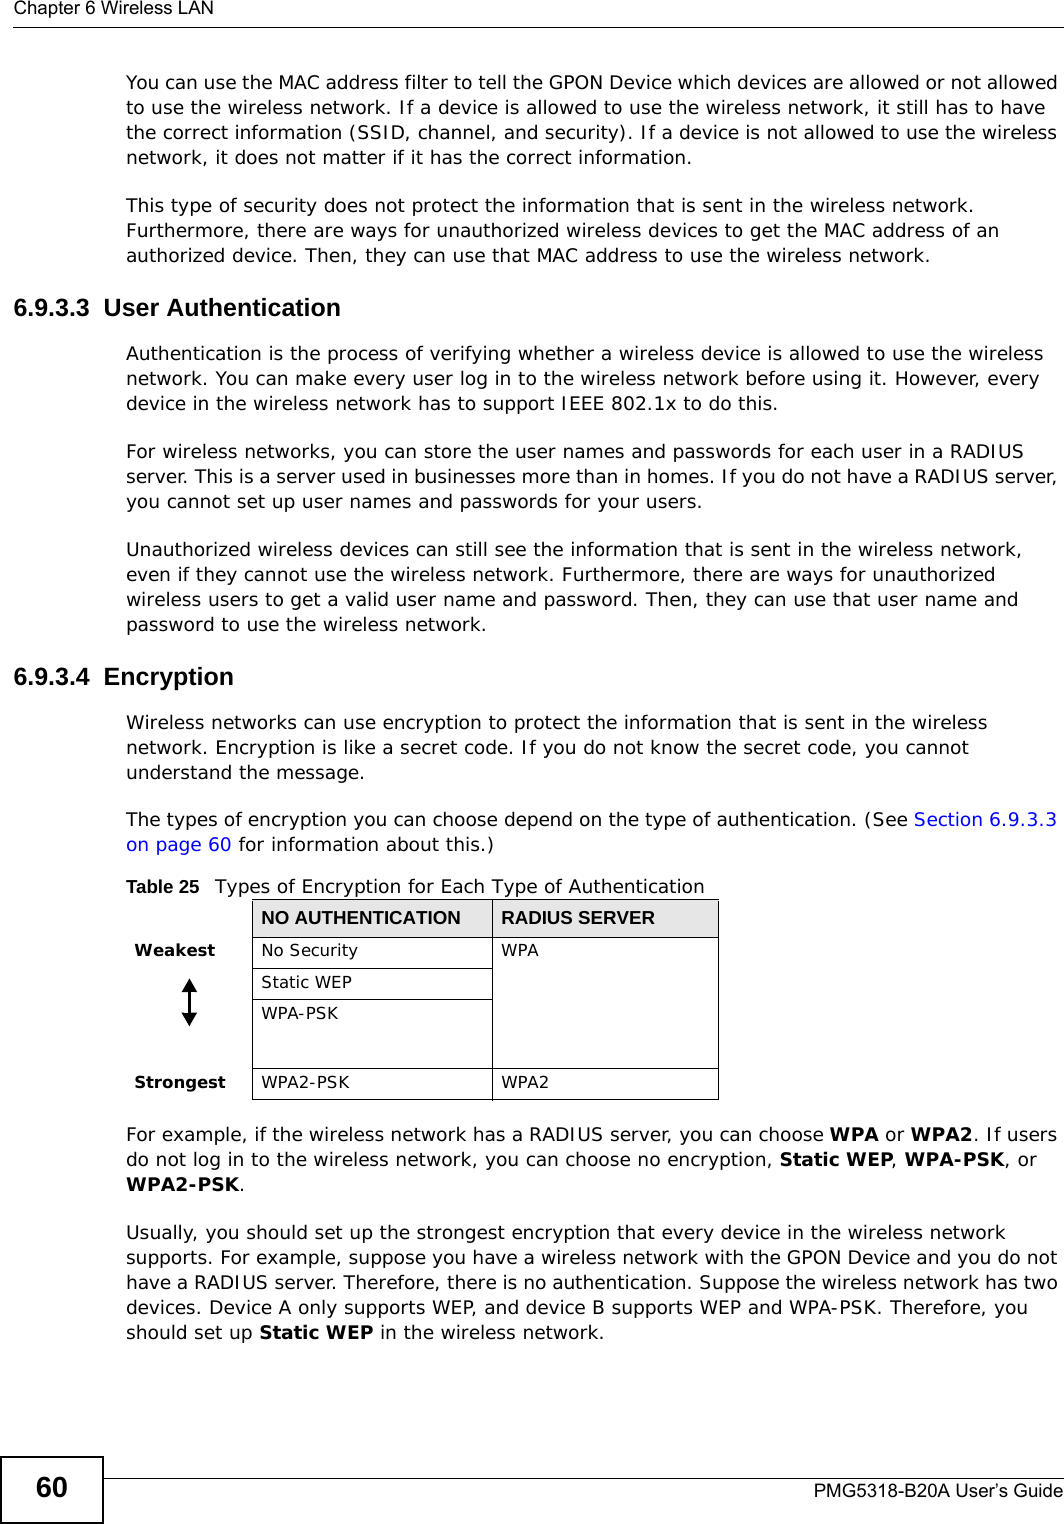 Chapter 6 Wireless LANPMG5318-B20A User’s Guide60You can use the MAC address filter to tell the GPON Device which devices are allowed or not allowed to use the wireless network. If a device is allowed to use the wireless network, it still has to have the correct information (SSID, channel, and security). If a device is not allowed to use the wireless network, it does not matter if it has the correct information.This type of security does not protect the information that is sent in the wireless network. Furthermore, there are ways for unauthorized wireless devices to get the MAC address of an authorized device. Then, they can use that MAC address to use the wireless network.6.9.3.3  User AuthenticationAuthentication is the process of verifying whether a wireless device is allowed to use the wireless network. You can make every user log in to the wireless network before using it. However, every device in the wireless network has to support IEEE 802.1x to do this.For wireless networks, you can store the user names and passwords for each user in a RADIUS server. This is a server used in businesses more than in homes. If you do not have a RADIUS server, you cannot set up user names and passwords for your users.Unauthorized wireless devices can still see the information that is sent in the wireless network, even if they cannot use the wireless network. Furthermore, there are ways for unauthorized wireless users to get a valid user name and password. Then, they can use that user name and password to use the wireless network.6.9.3.4  EncryptionWireless networks can use encryption to protect the information that is sent in the wireless network. Encryption is like a secret code. If you do not know the secret code, you cannot understand the message.The types of encryption you can choose depend on the type of authentication. (See Section 6.9.3.3 on page 60 for information about this.)For example, if the wireless network has a RADIUS server, you can choose WPA or WPA2. If users do not log in to the wireless network, you can choose no encryption, Static WEP, WPA-PSK, or WPA2-PSK.Usually, you should set up the strongest encryption that every device in the wireless network supports. For example, suppose you have a wireless network with the GPON Device and you do not have a RADIUS server. Therefore, there is no authentication. Suppose the wireless network has two devices. Device A only supports WEP, and device B supports WEP and WPA-PSK. Therefore, you should set up Static WEP in the wireless network.Table 25   Types of Encryption for Each Type of AuthenticationNO AUTHENTICATION RADIUS SERVERWeakest No Security WPAStatic WEPWPA-PSKStrongest WPA2-PSK WPA2